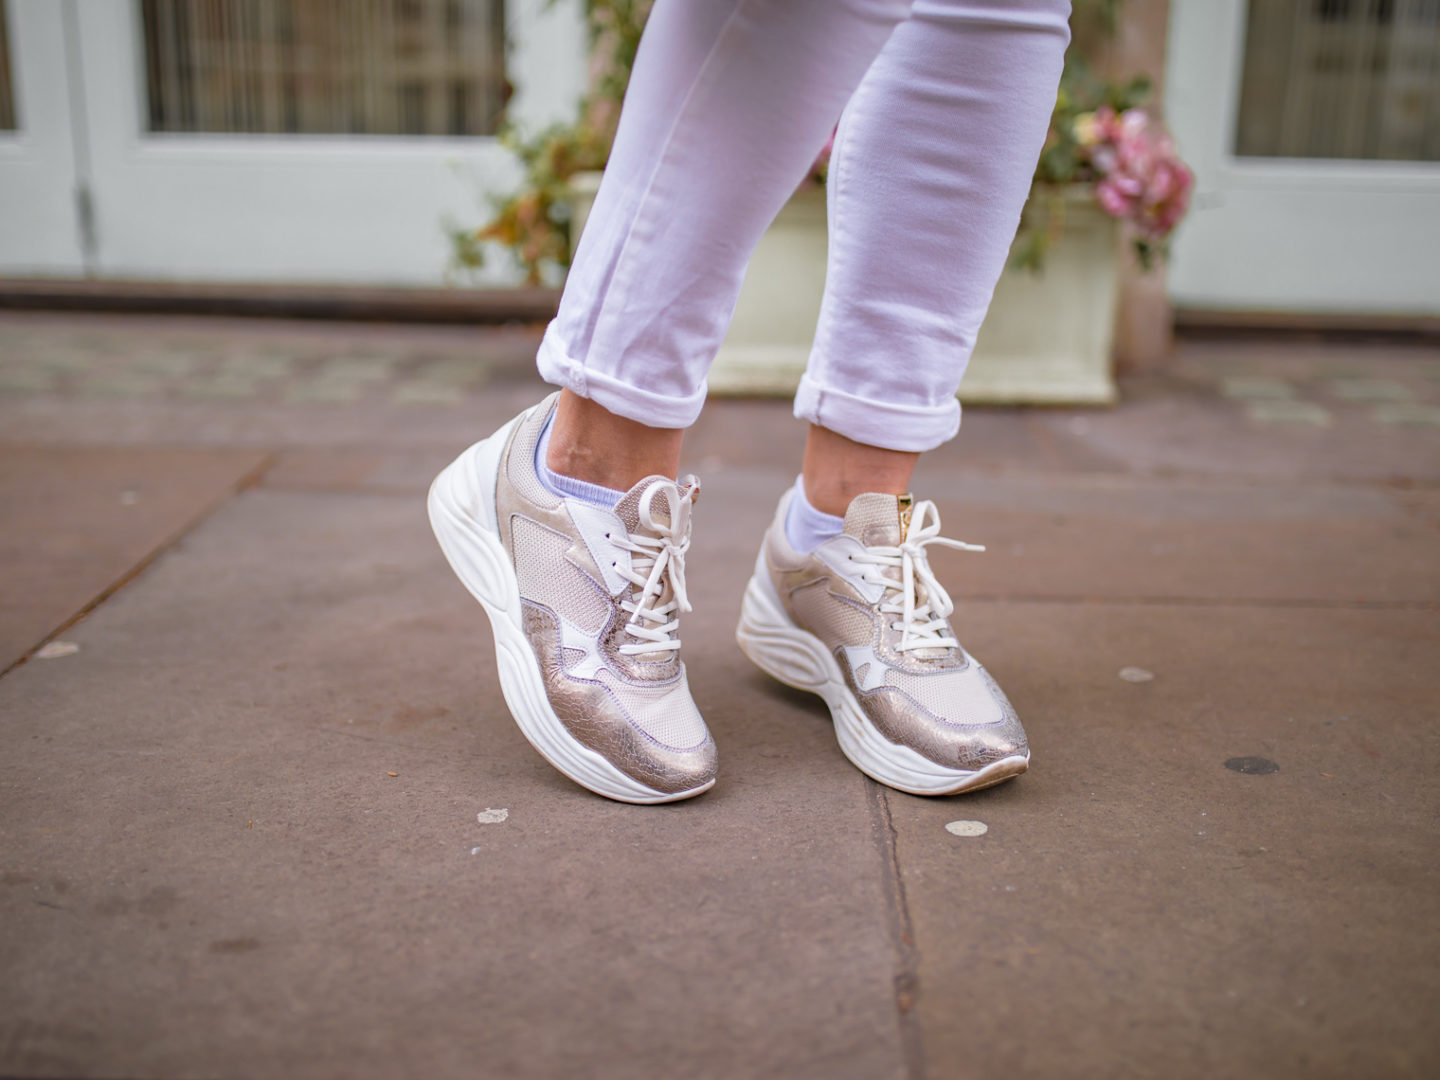 Best thing to buy this month: Chunky trainers that you will wear all year round